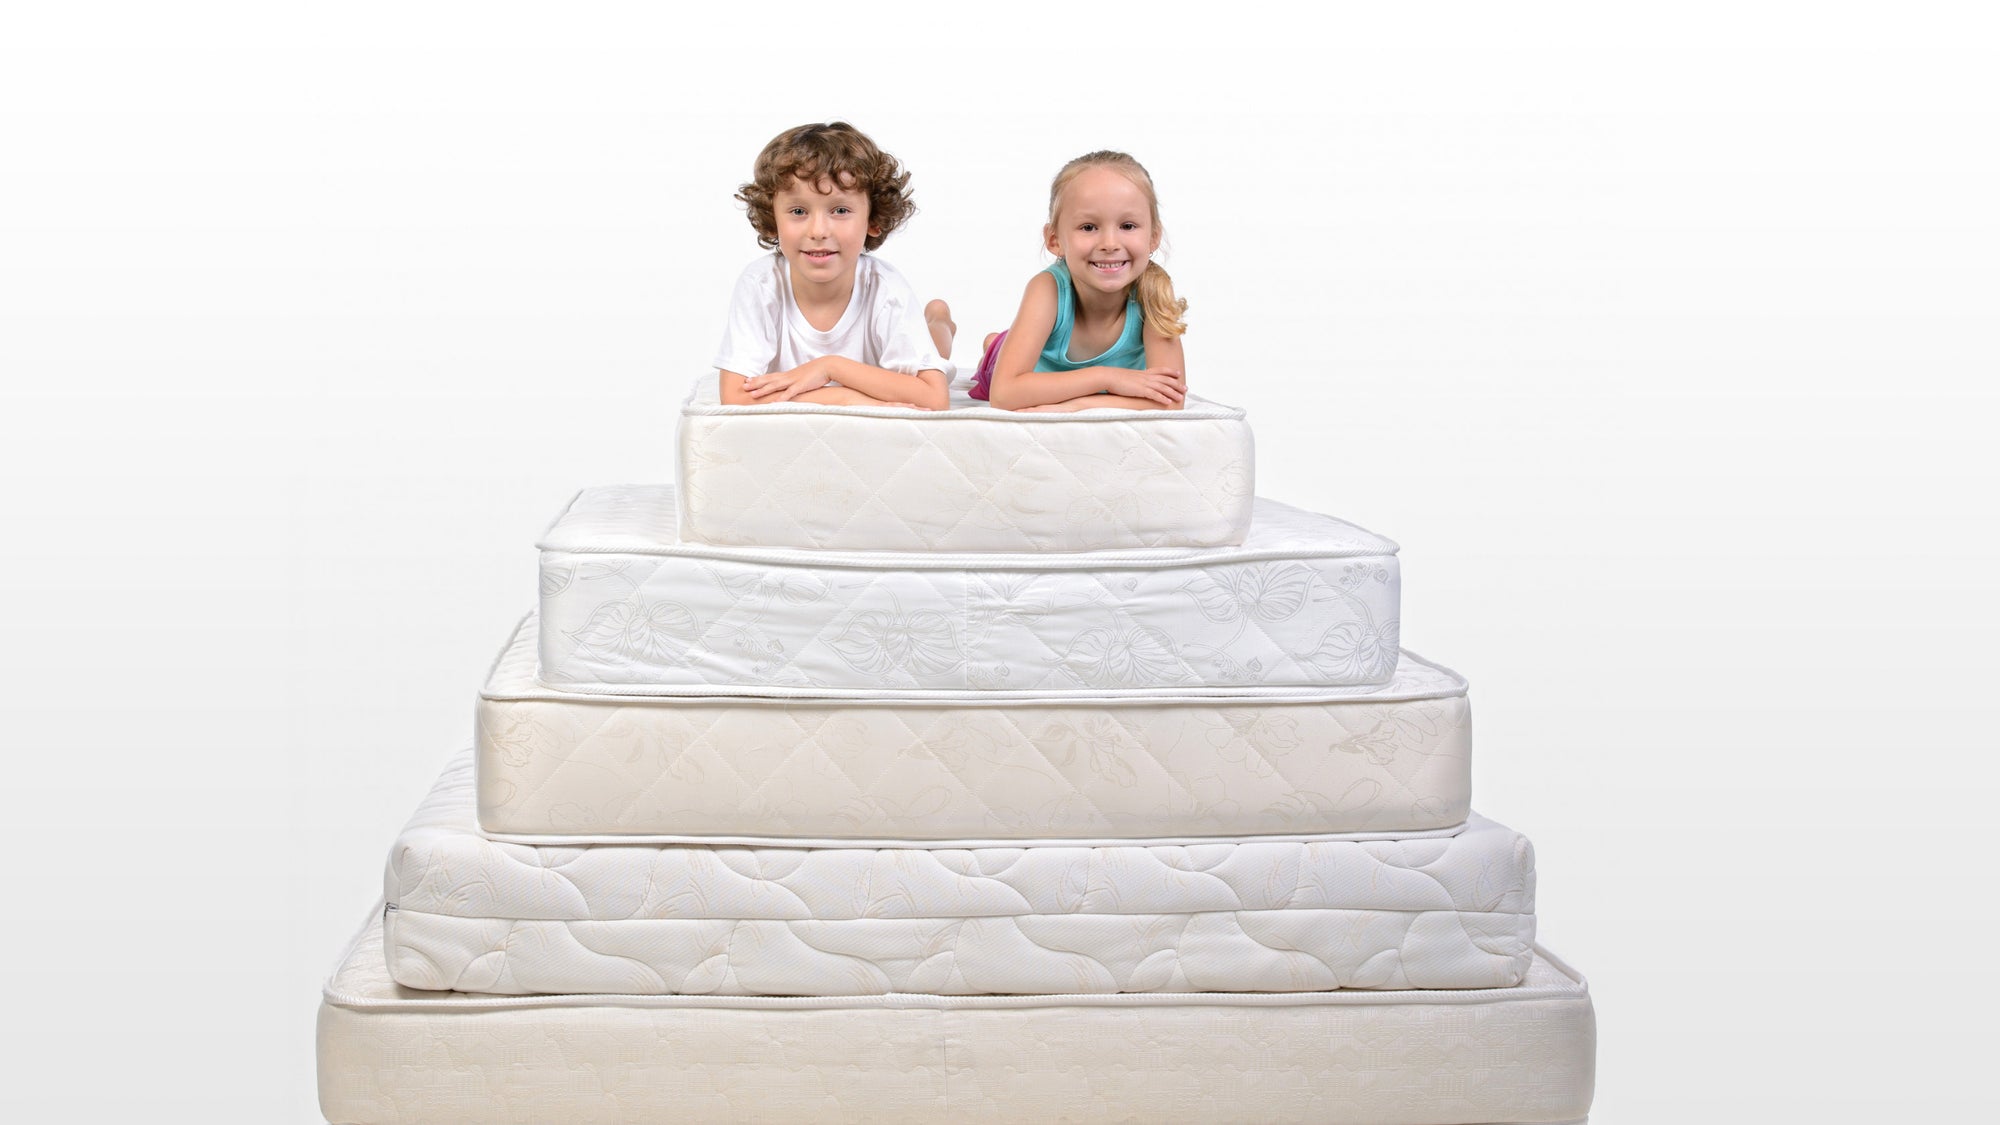 Kids Mattress Sizes - Find the Best Size Bed for Your Child